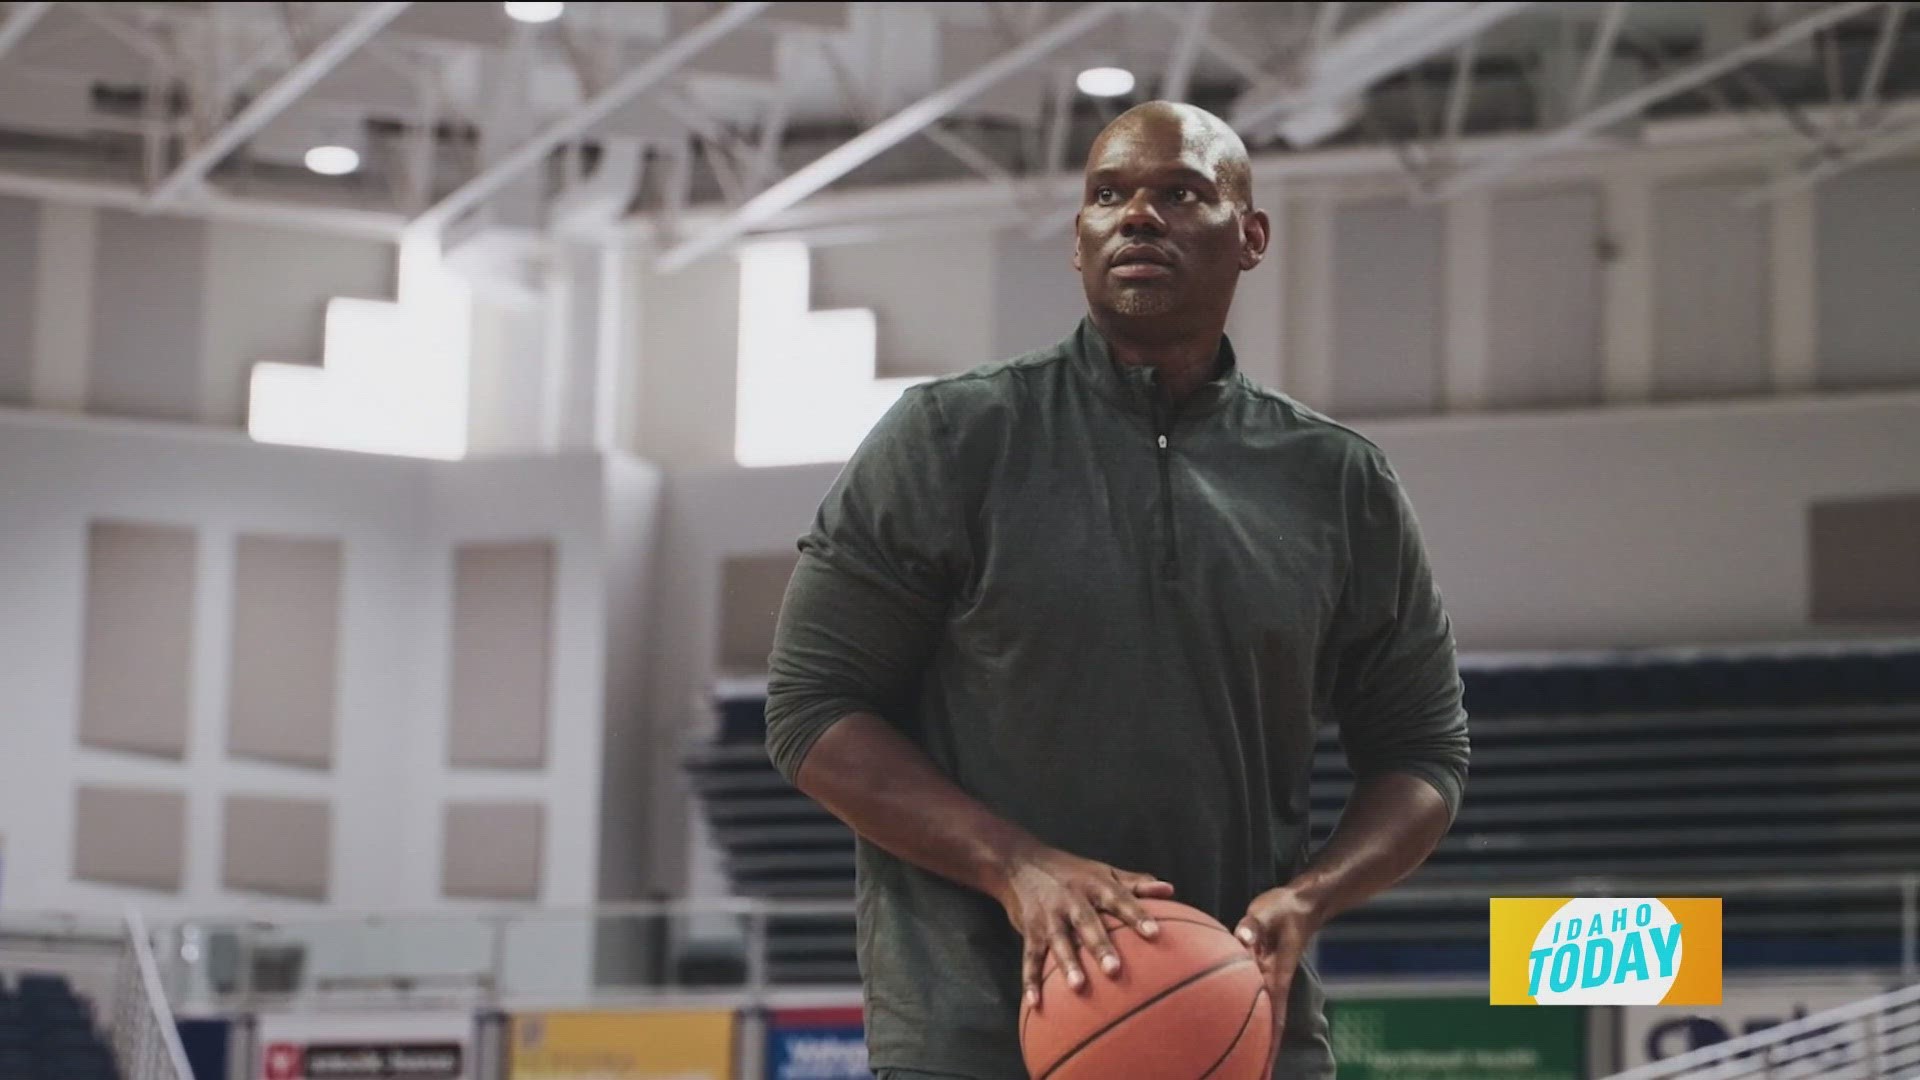 Former NBA All Star Jamal Mashburn was an inspiration on the court and is now helping save lives off the court by raising awareness for Colorectal Cancer.